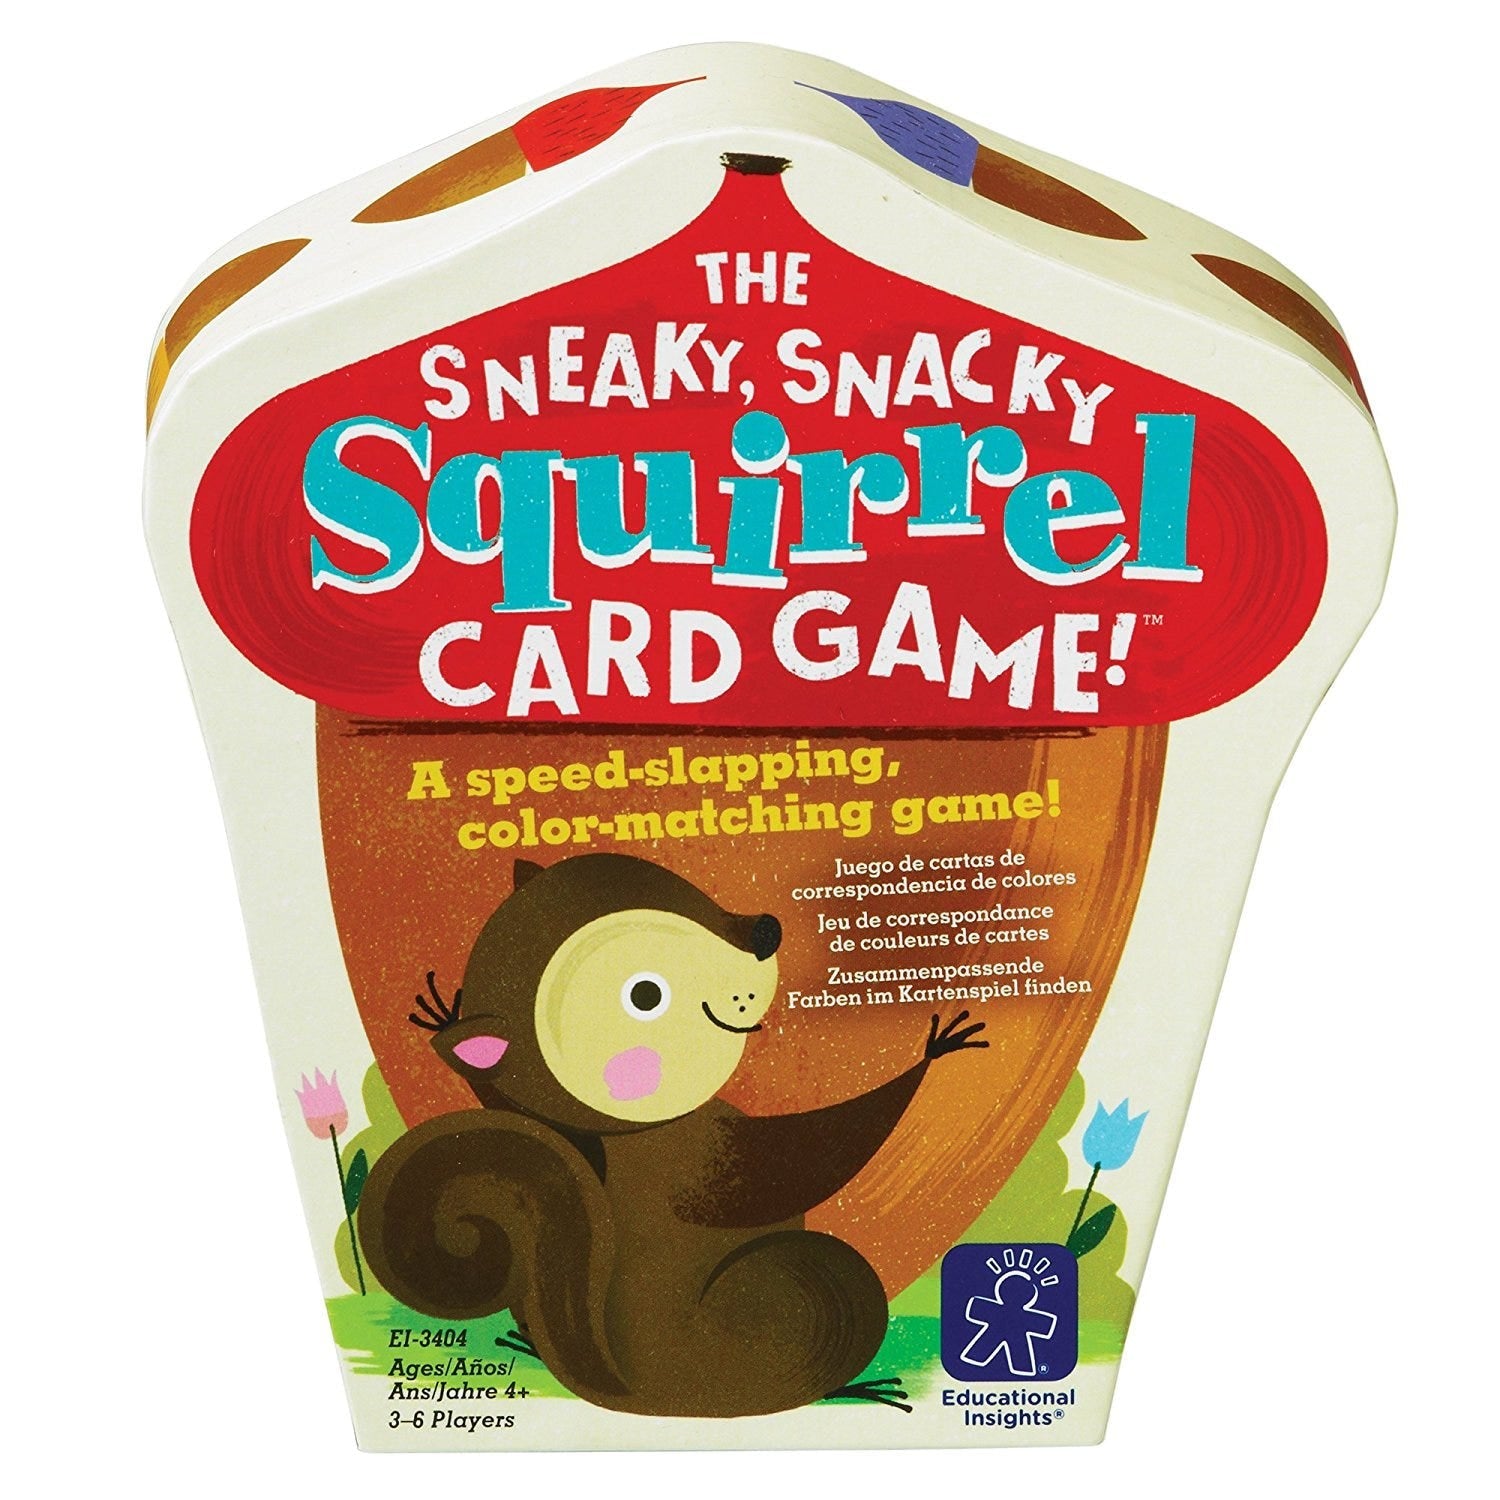 Sneaky, Snacky Squirrel Card Gm